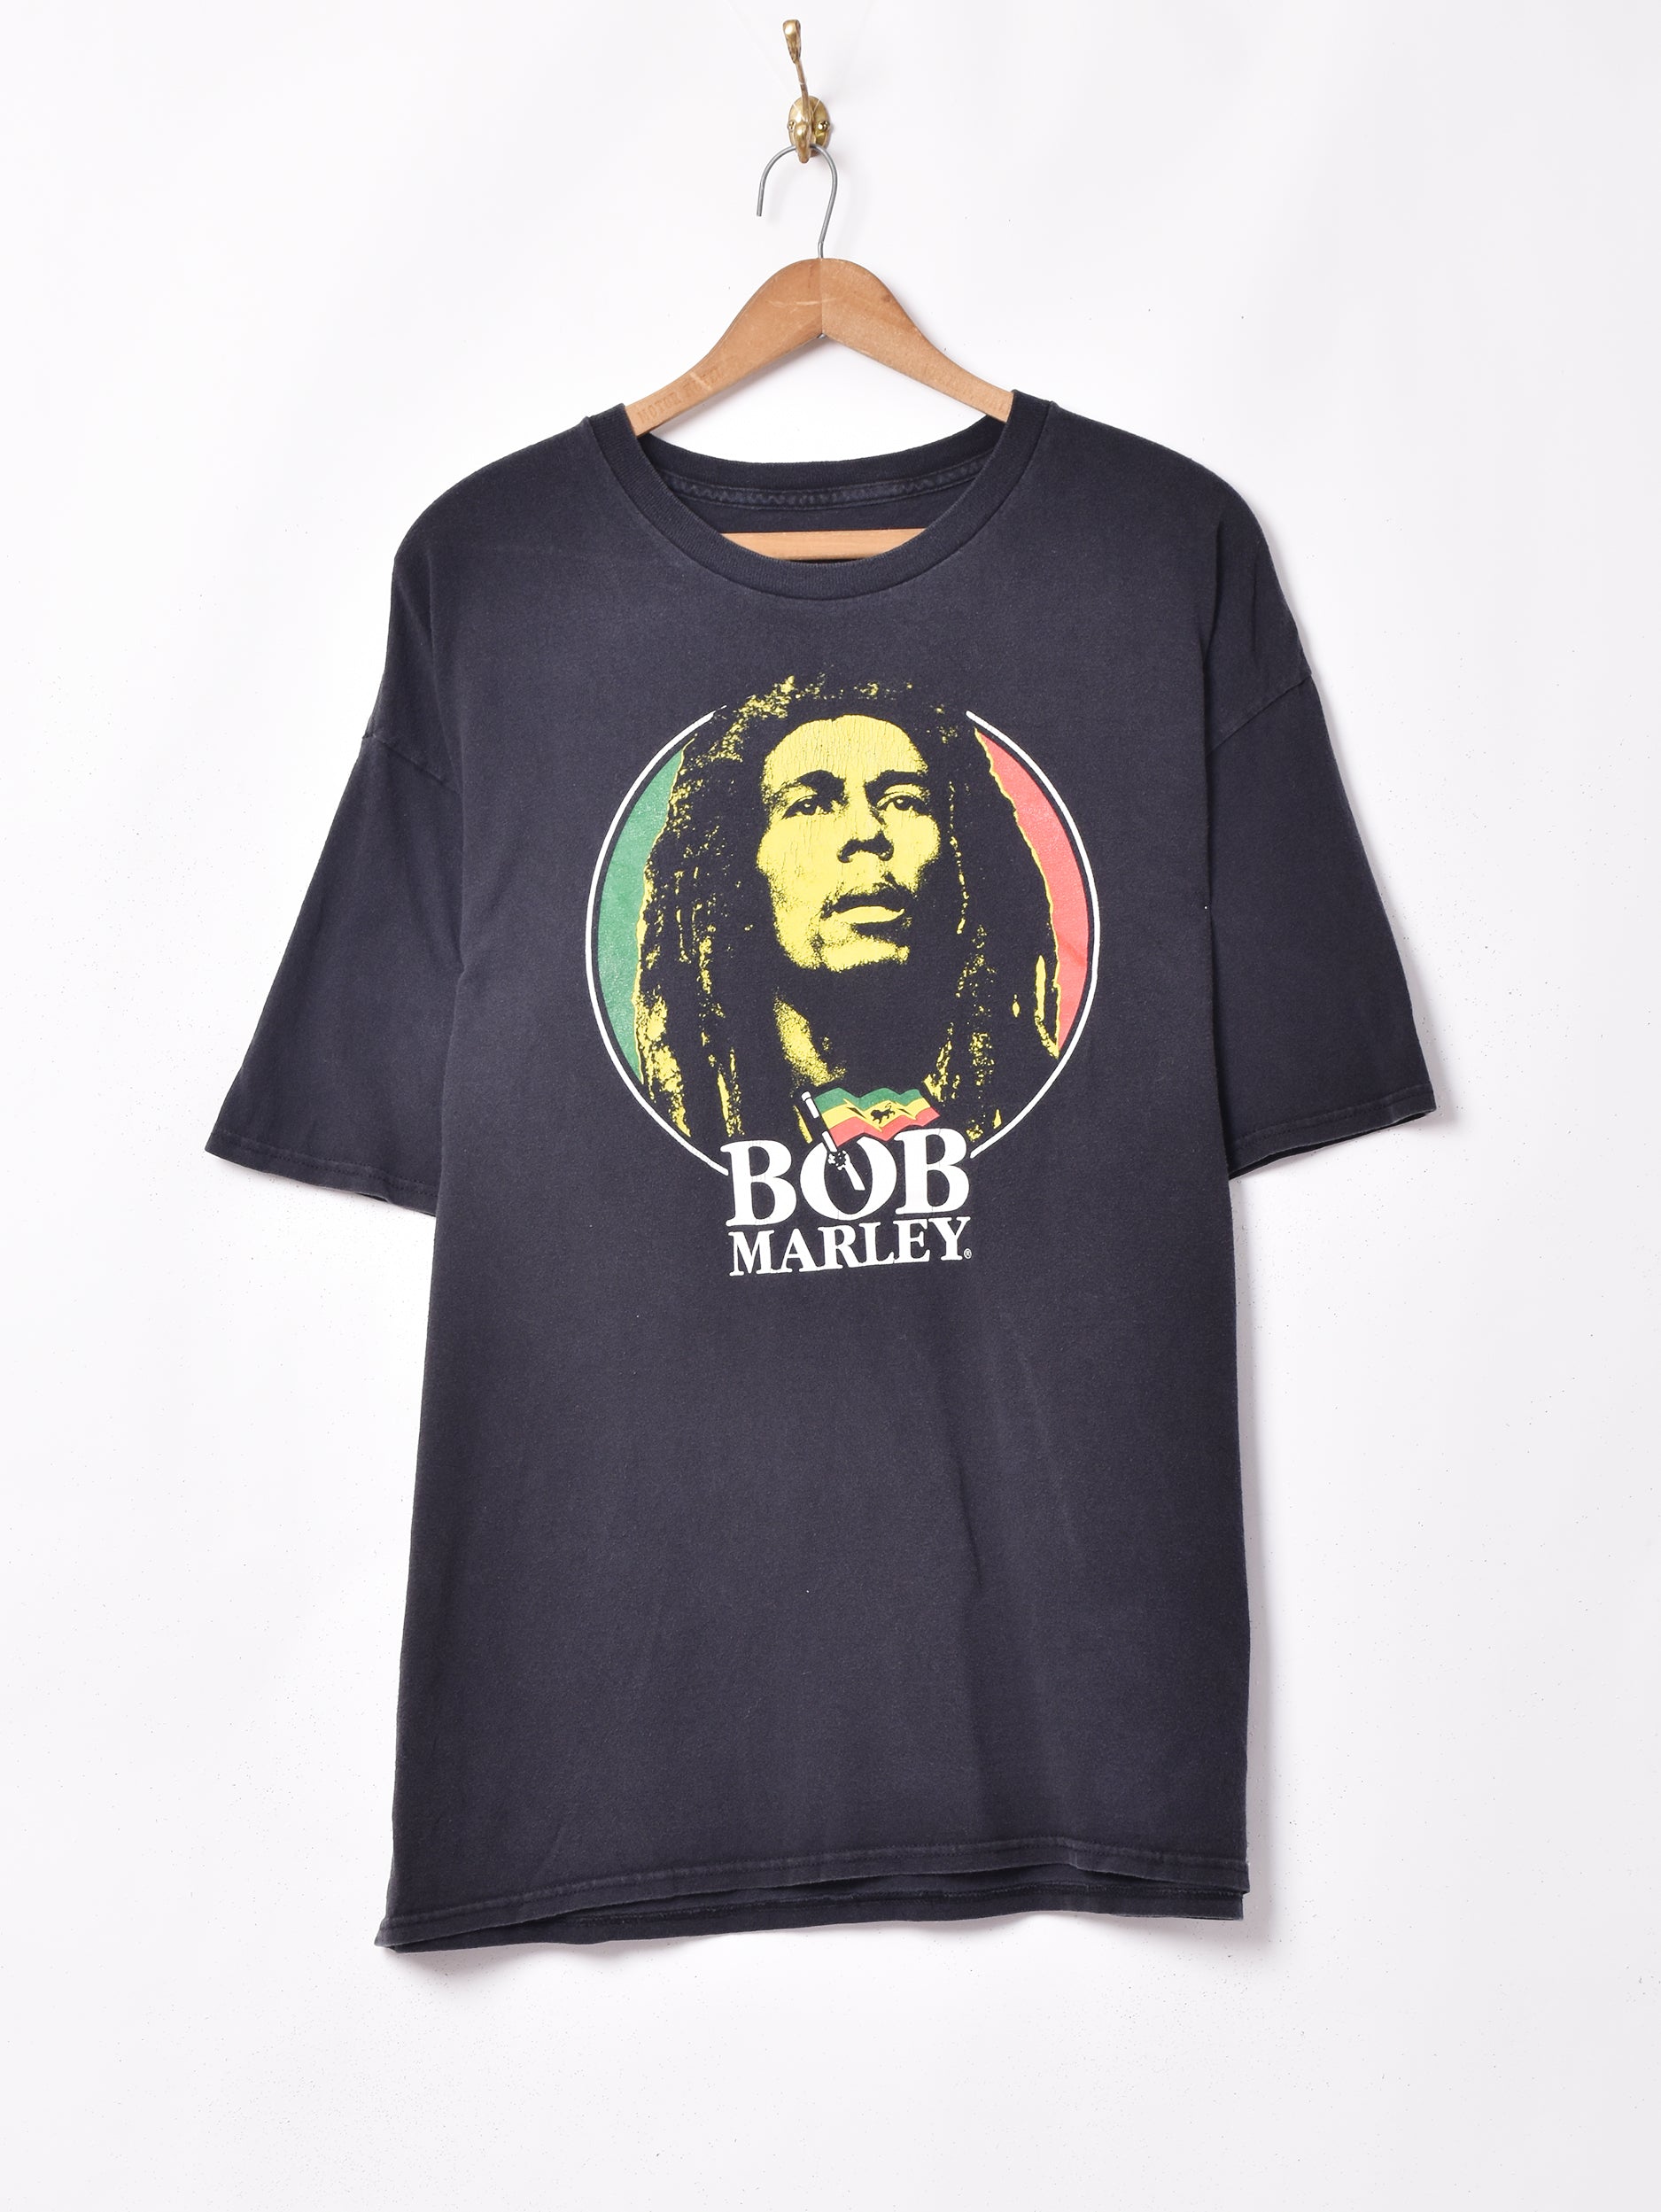 Bob Marley プリントTシャツ – 古着屋Top of the Hillのネット通販サイト